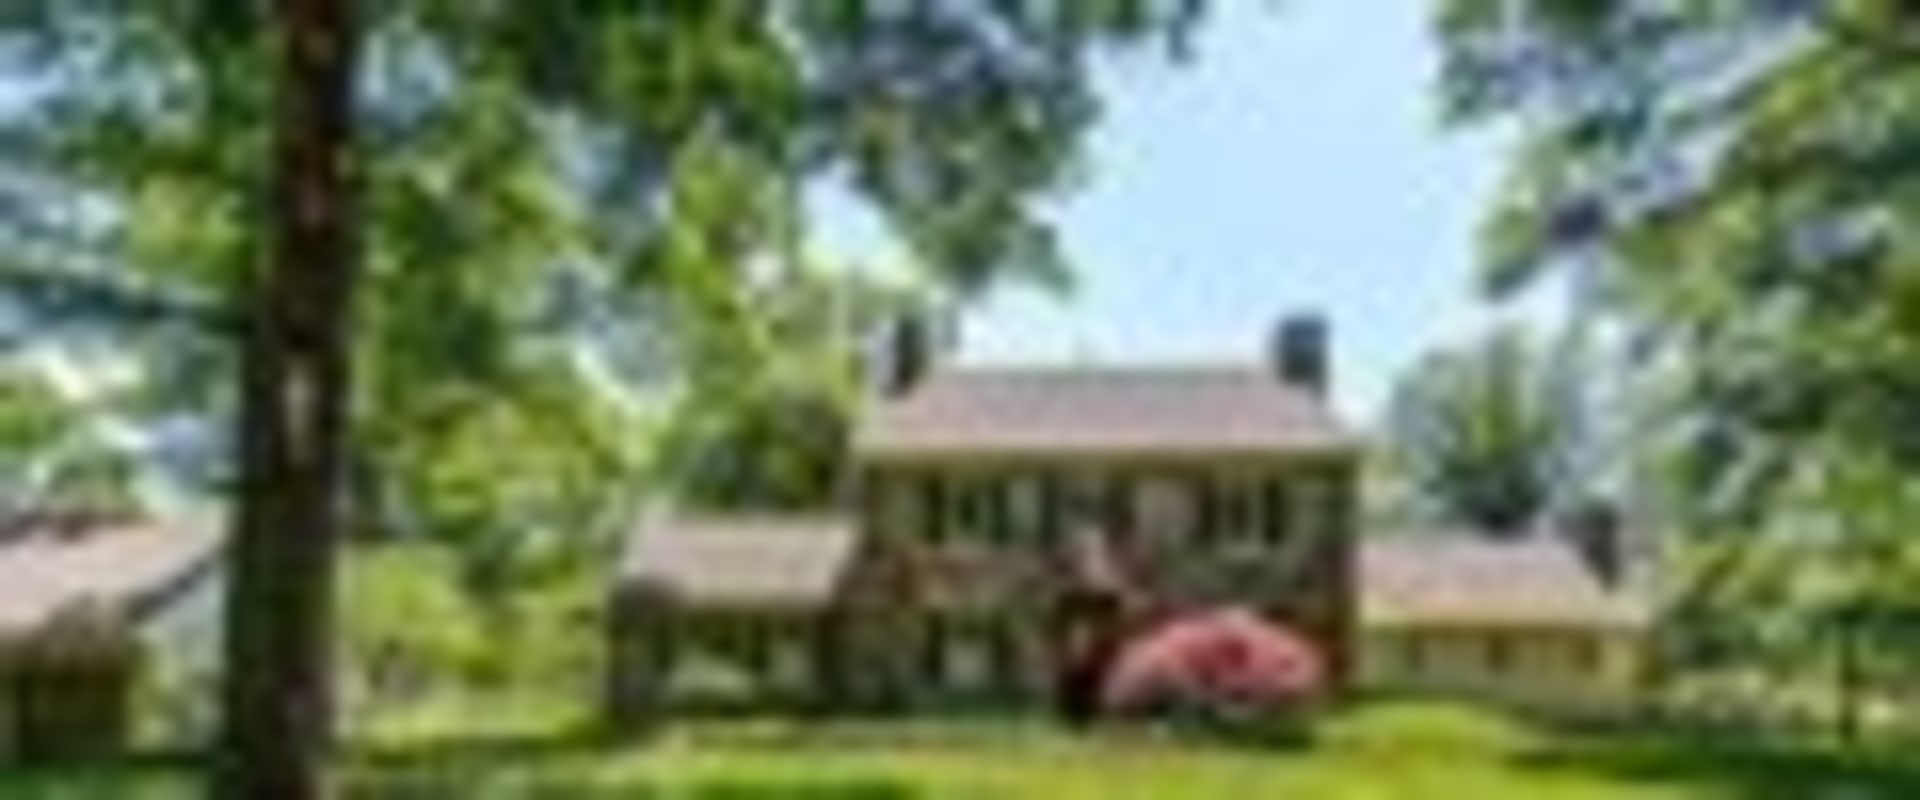 Find Your Dream Home with a Garage in Bucks County, Pennsylvania